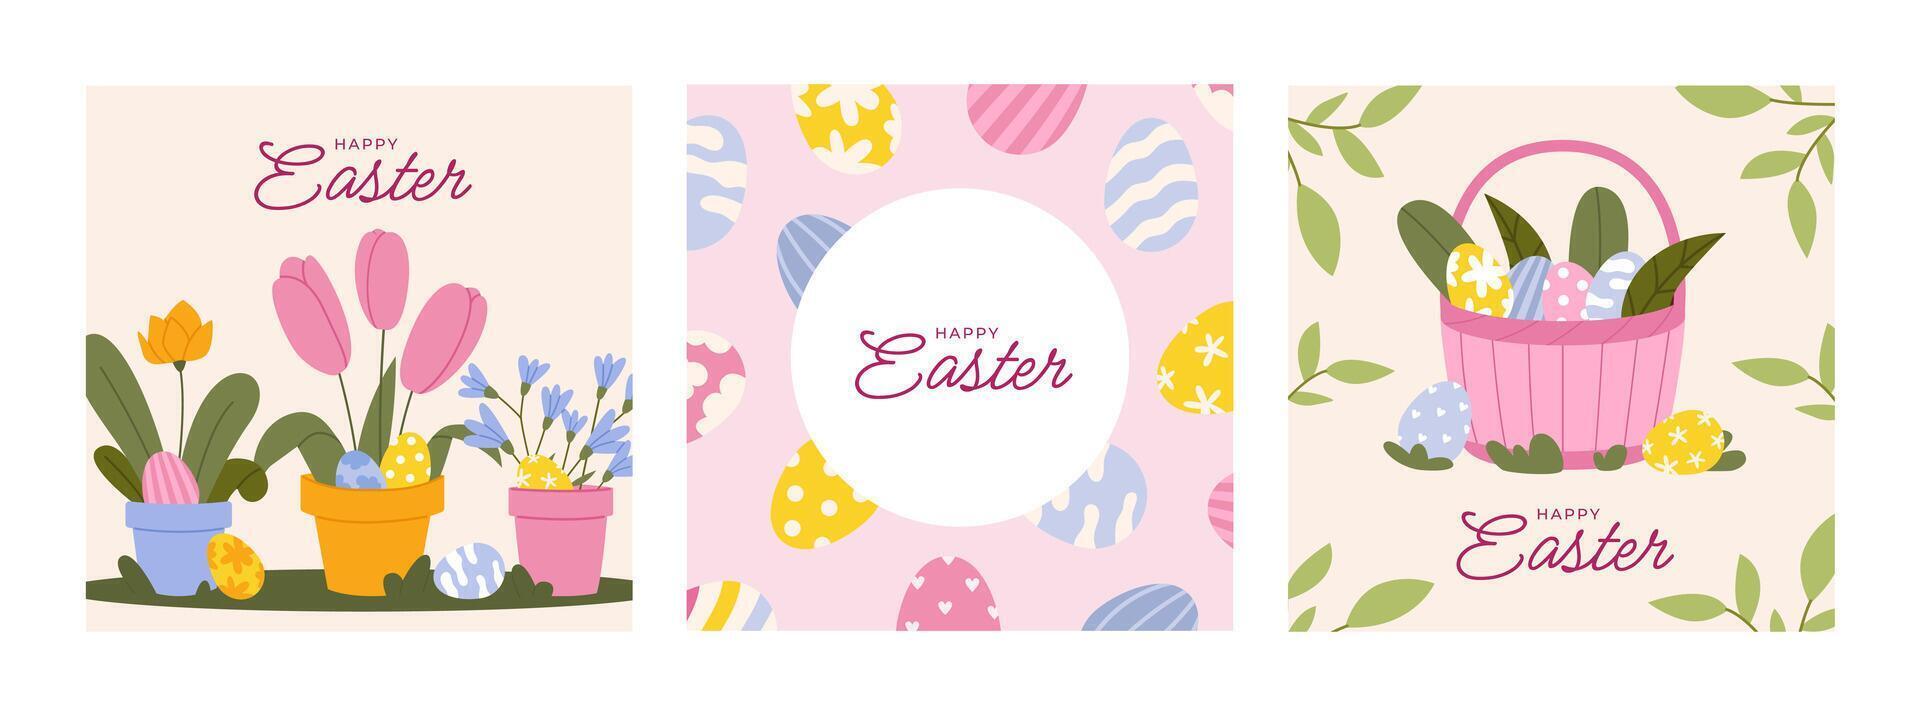 Happy Easter Set of banners vector